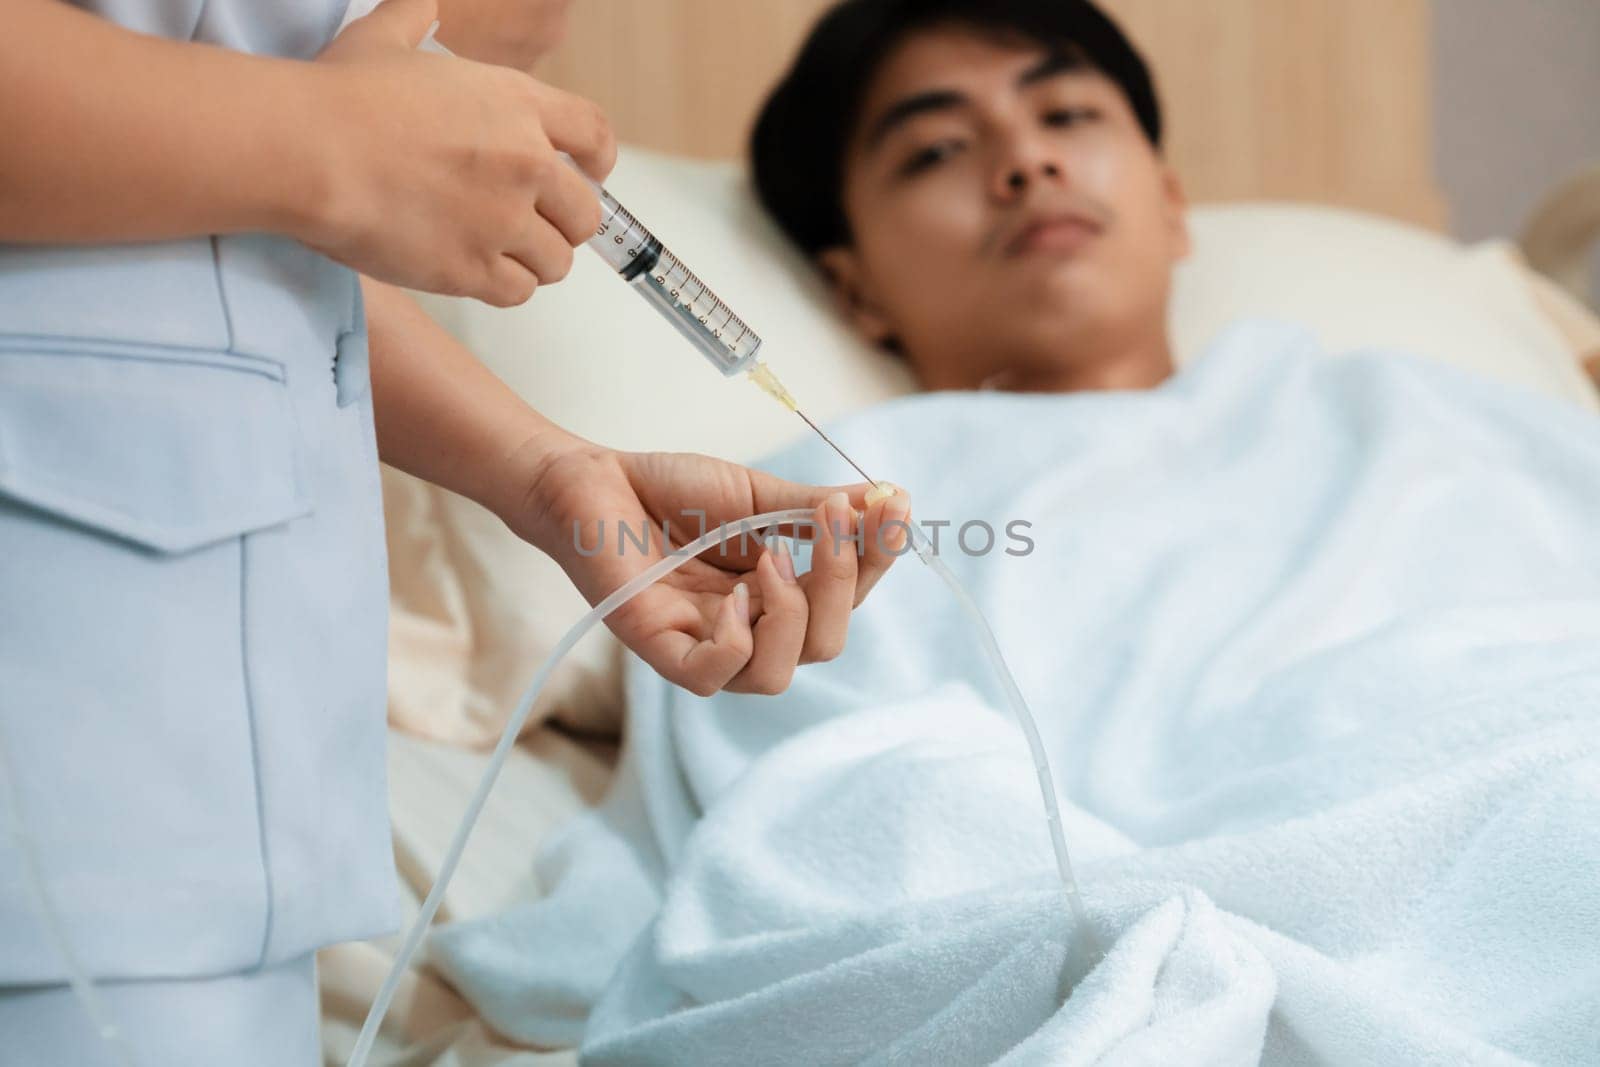 Doctor and nurse inject medicine, dosage into IV tube providing medical treatment to patient in sterile room at hospital. Fragile patient receive medical care on sick bed in recovery room.